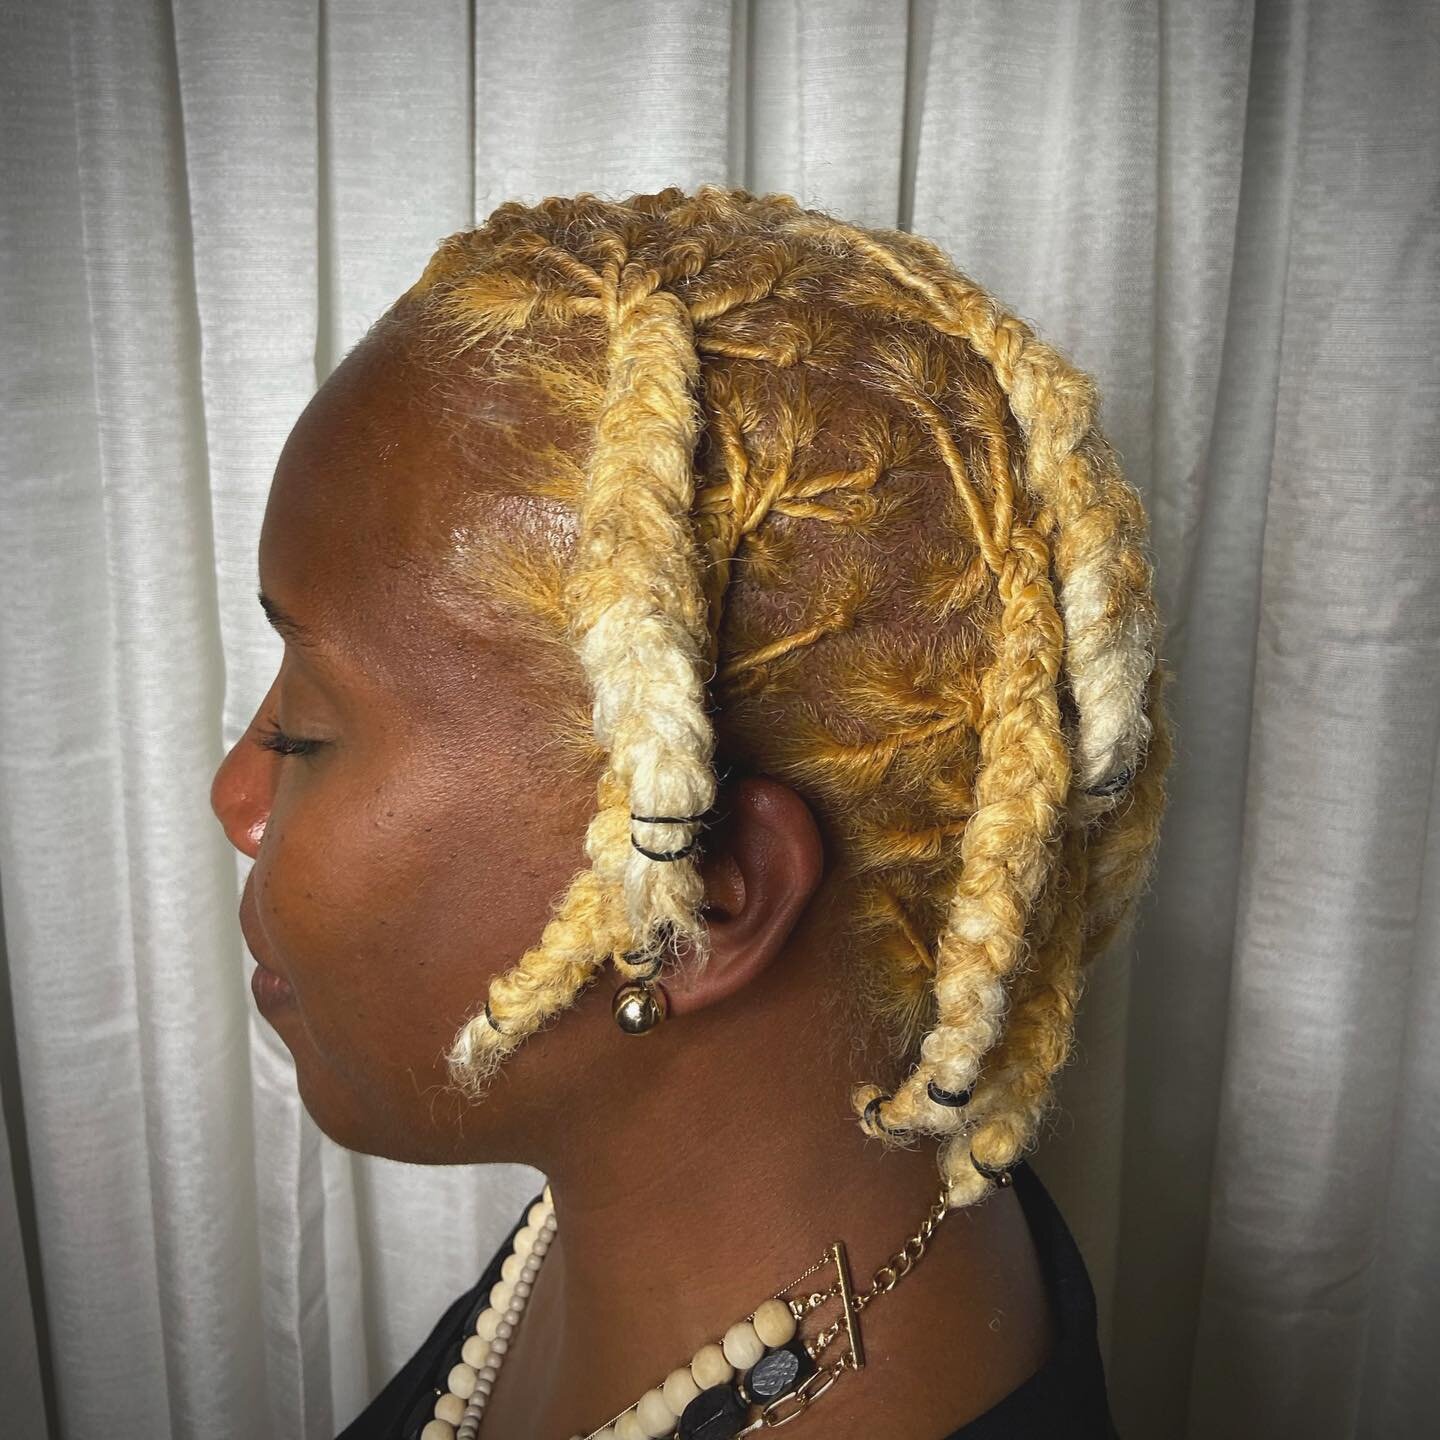 This is giving expensive, liquid gold, and just all over glowing summer vibes! Have you ever thought about wearing your locs in a warm blonde shade? Let&rsquo;s try it out and see if blondes do have more fun 😉🍯👑

#richmondva #richmondvahairstylist